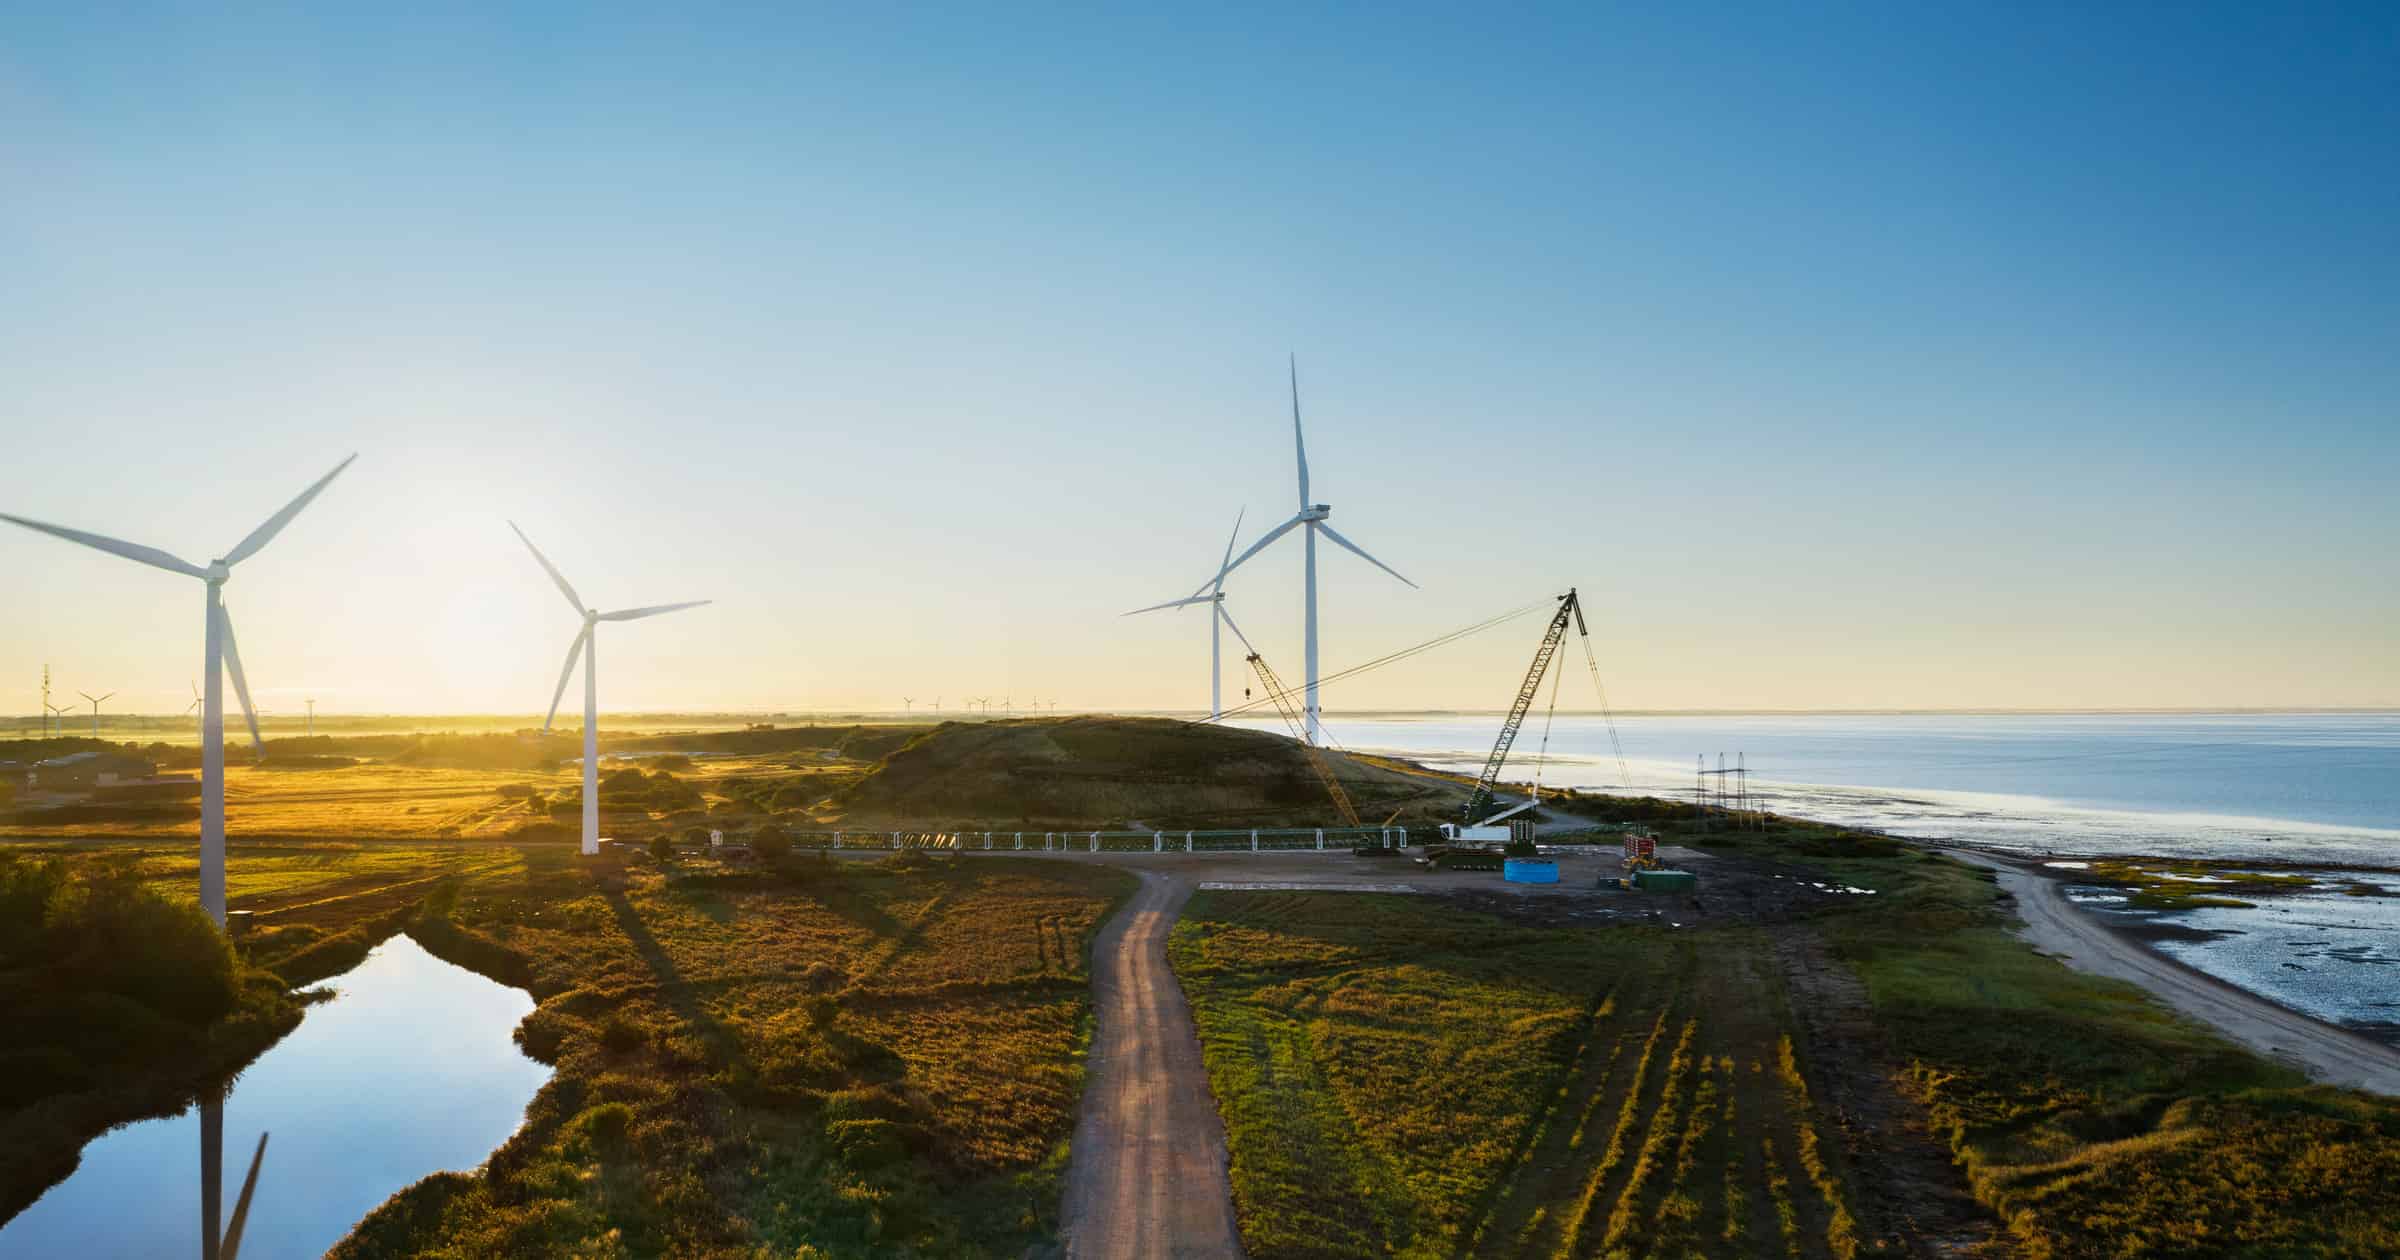 Apple Investing in Two of The World’s Largest Onshore Wind Turbines in European Renewable Energy Drive